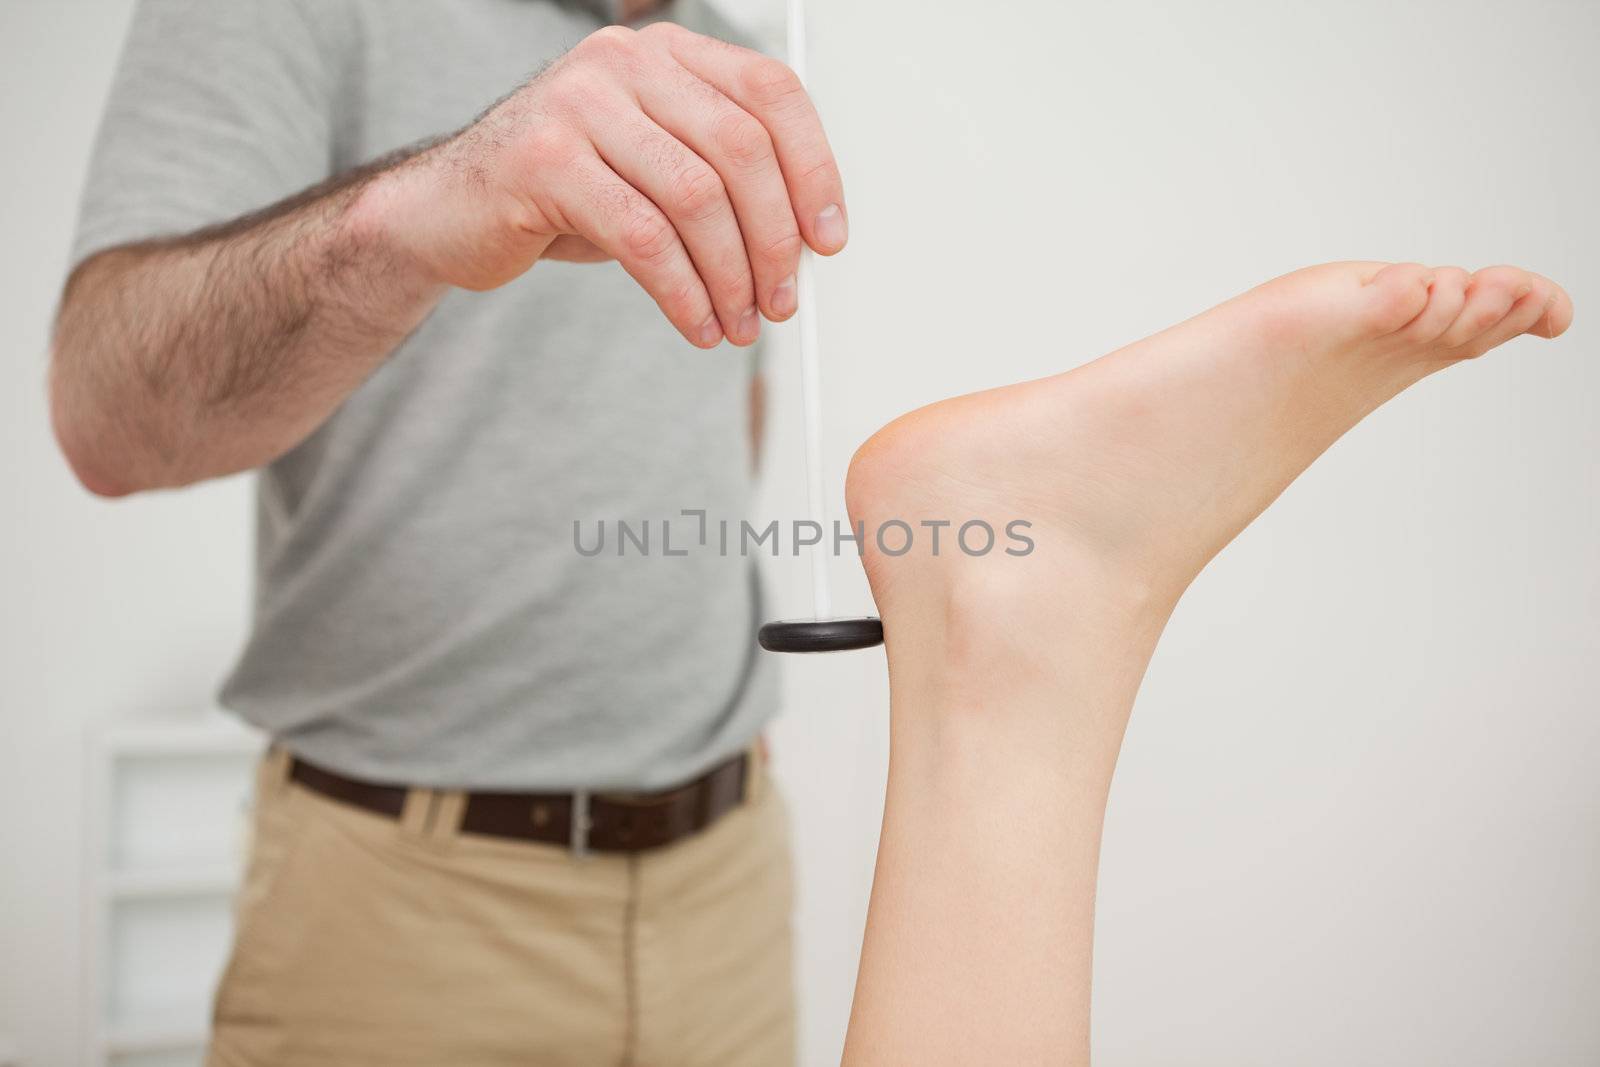 Reflex hammer being held by a doctor in a medical room